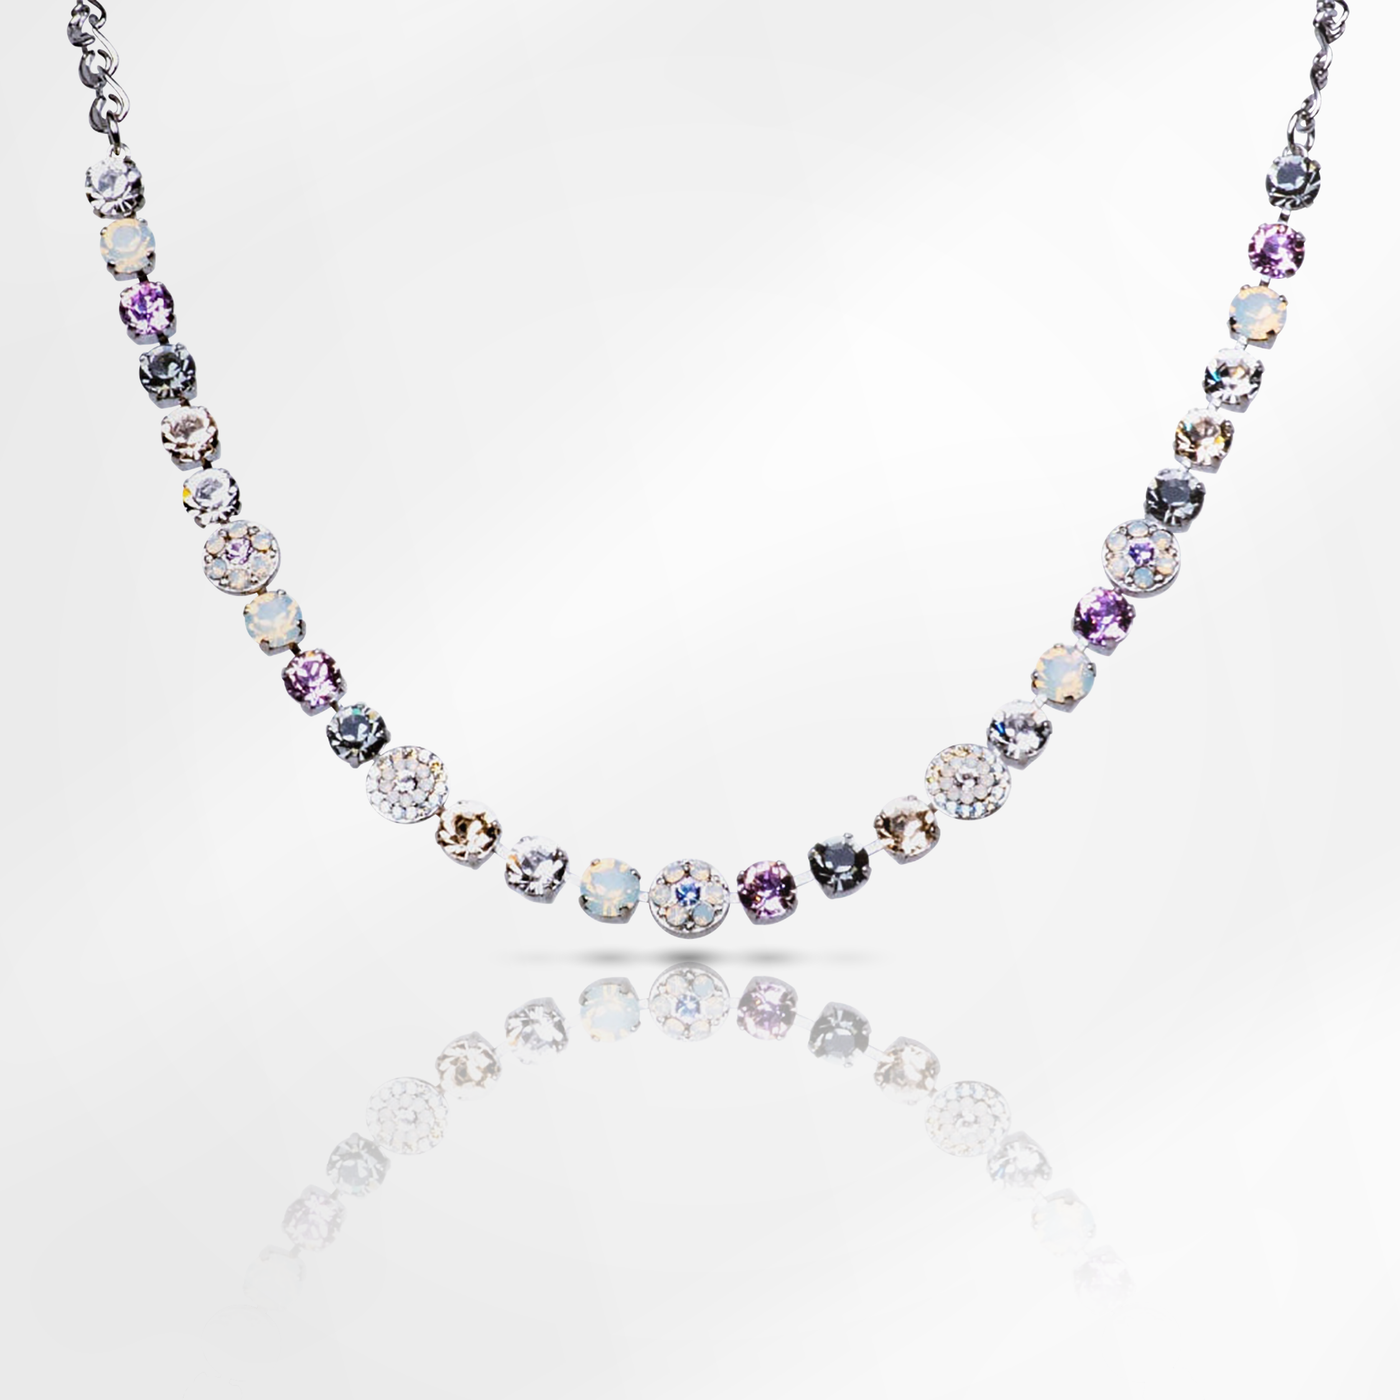 Must-Have Pavé "Ice Queen" Necklace